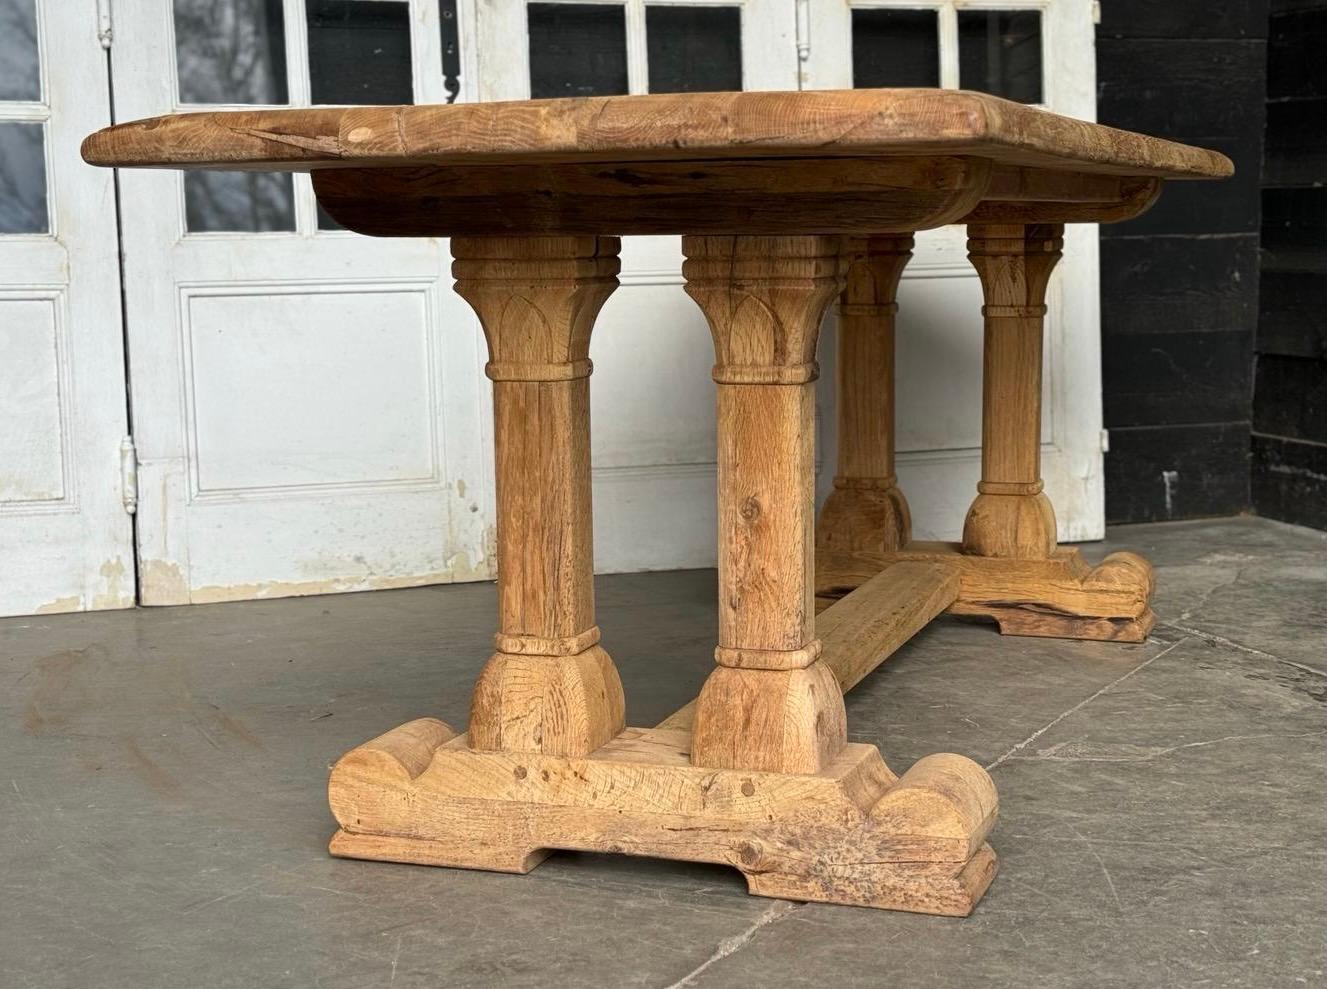 French Bleached Oak Farmhouse Dining Table  For Sale 9